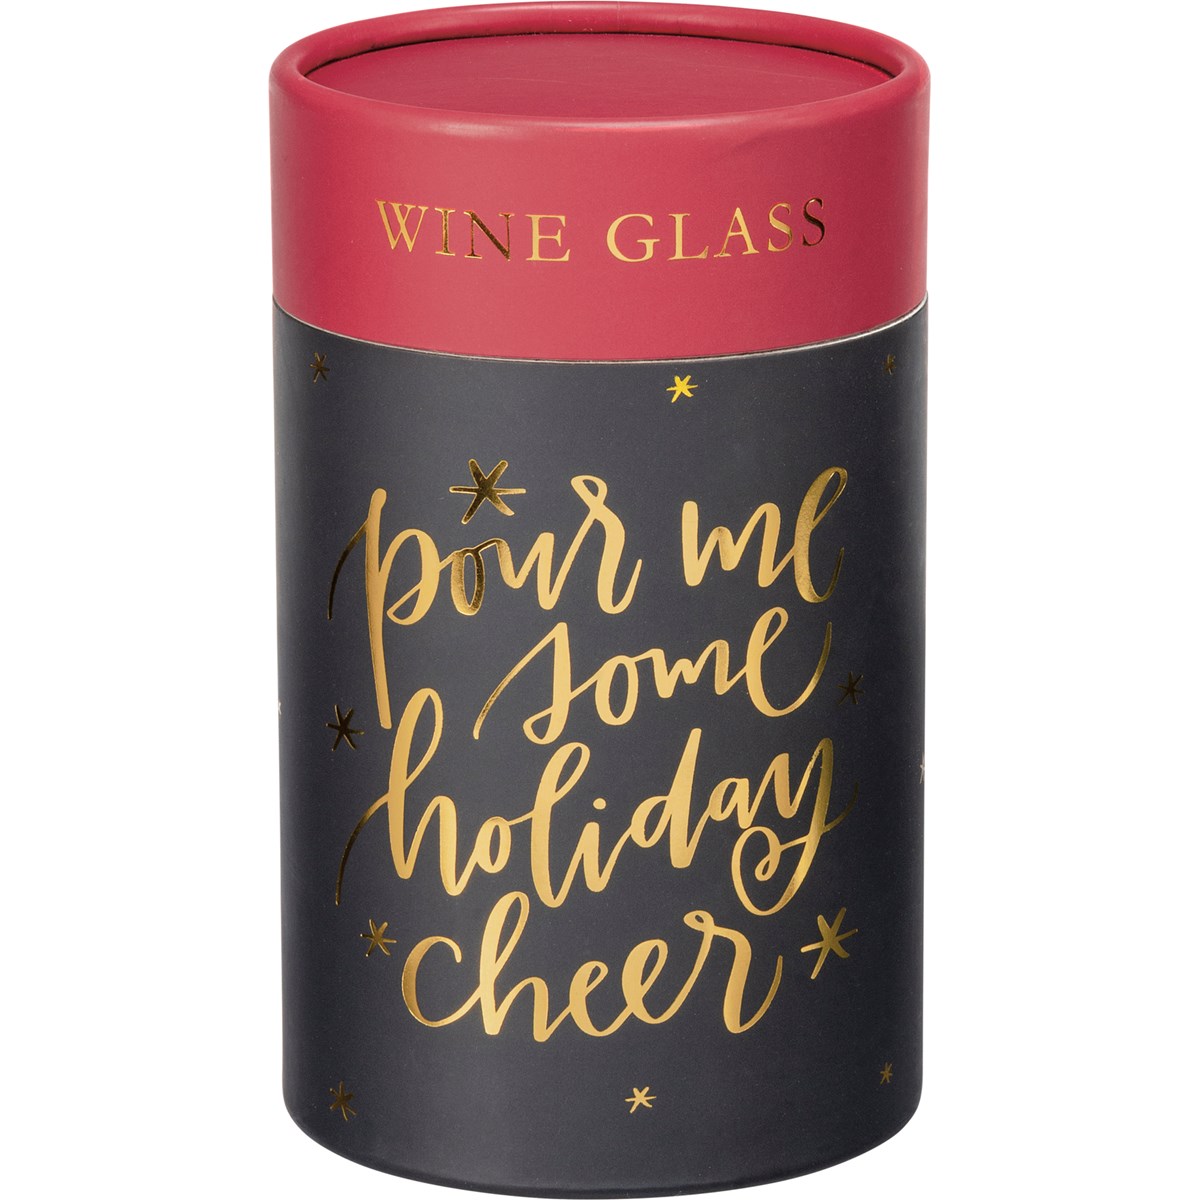 Pour Me Some Holiday Cheer Wine Glass - Glass